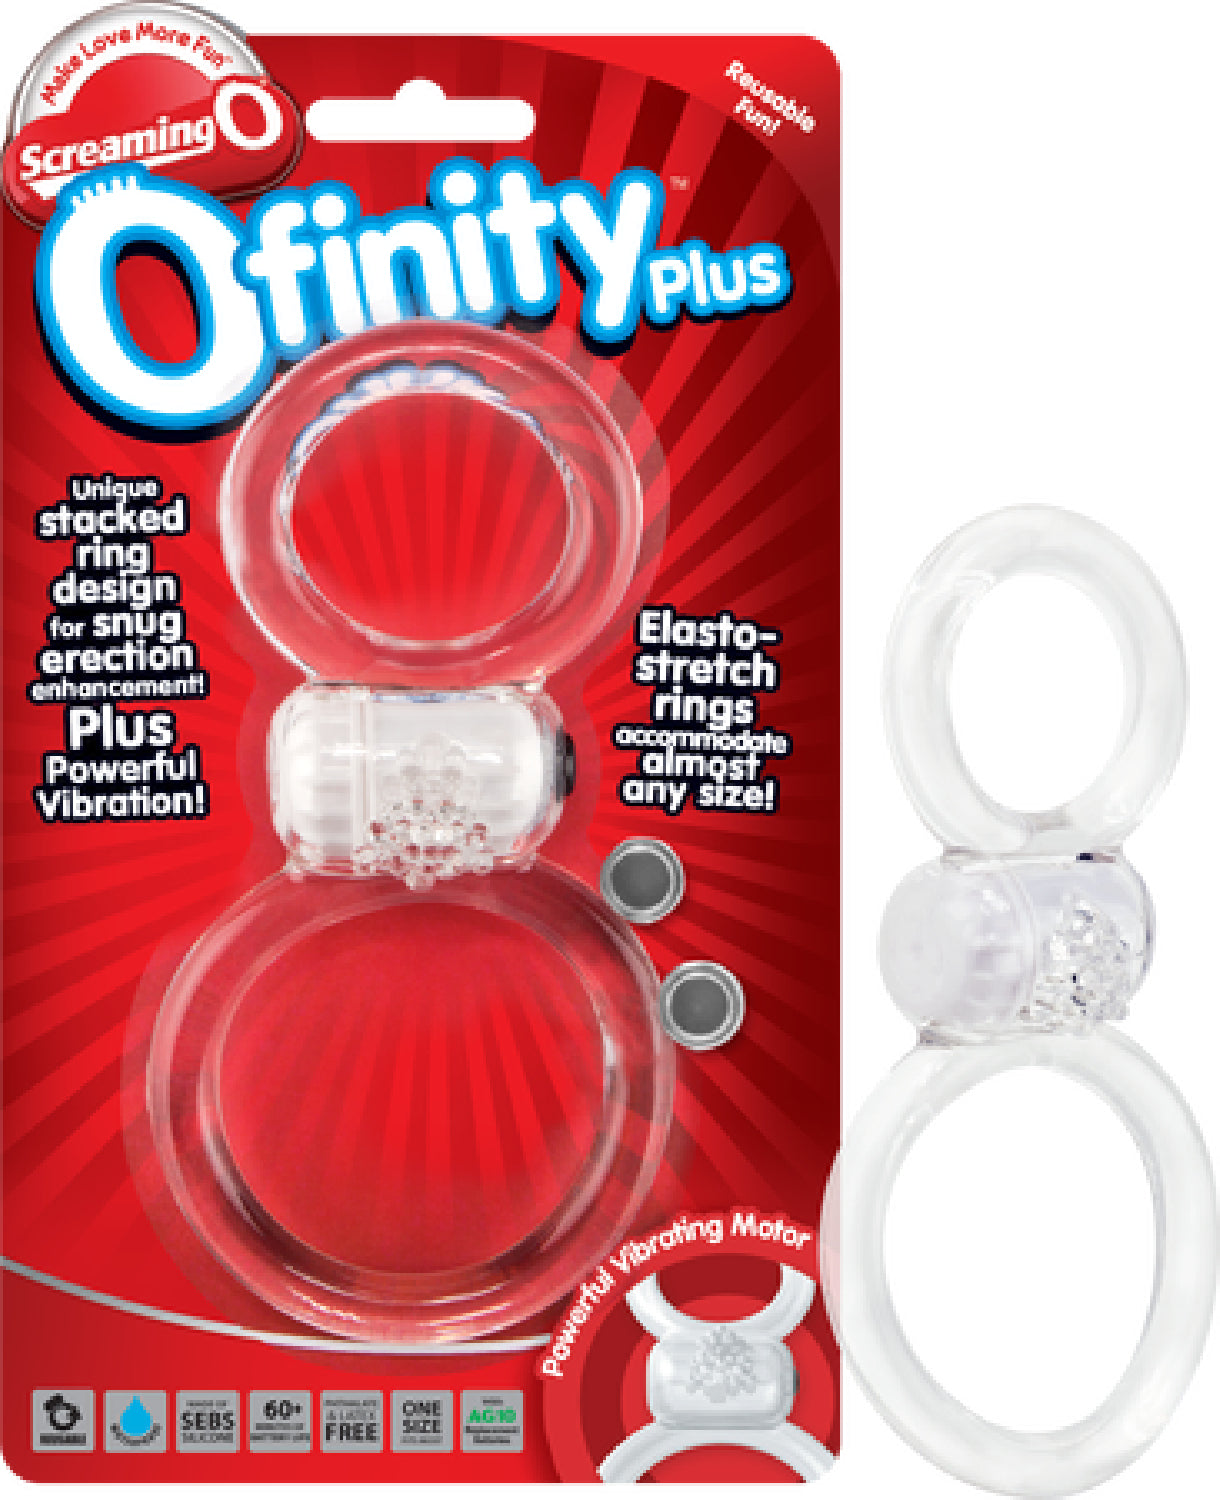 Ofinity - One Stop Adult Shop